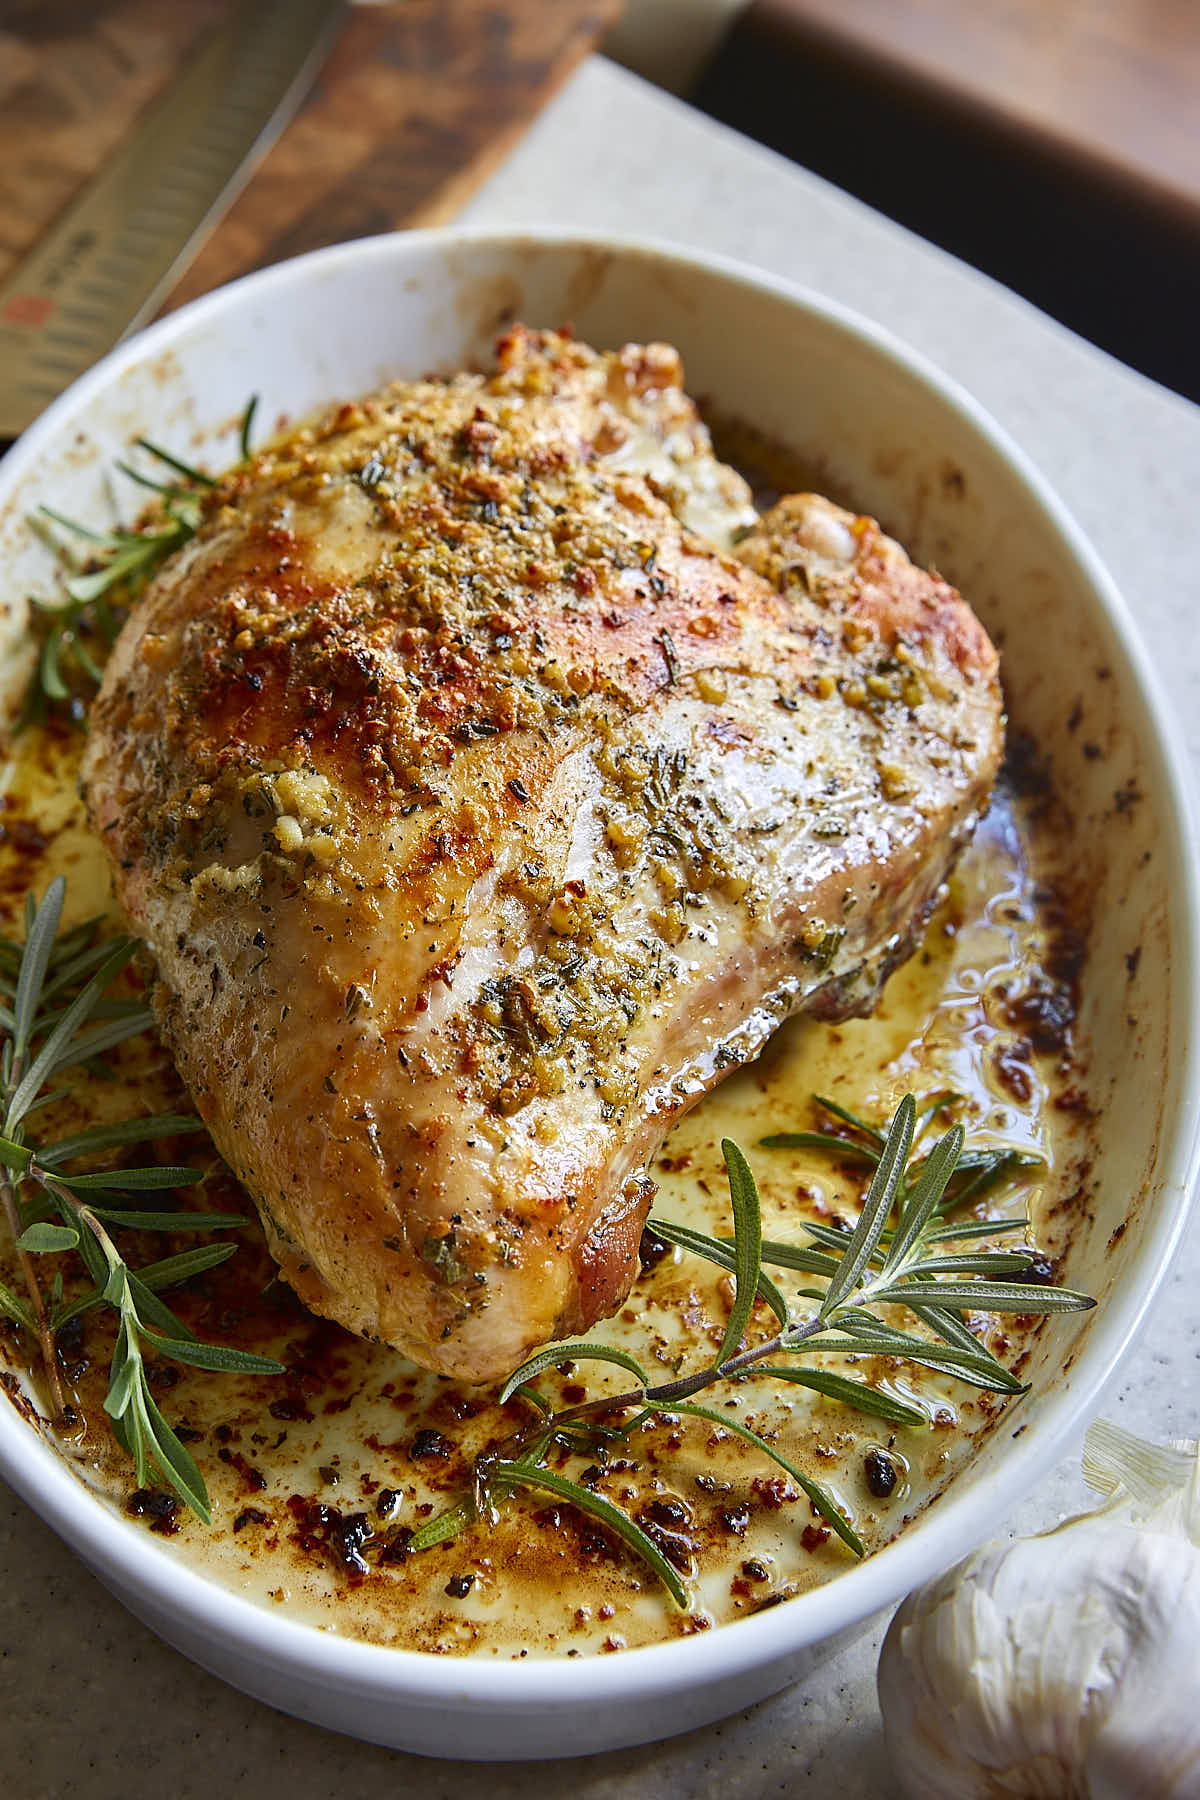 Roasted turkey breast, infused with garlic and herb